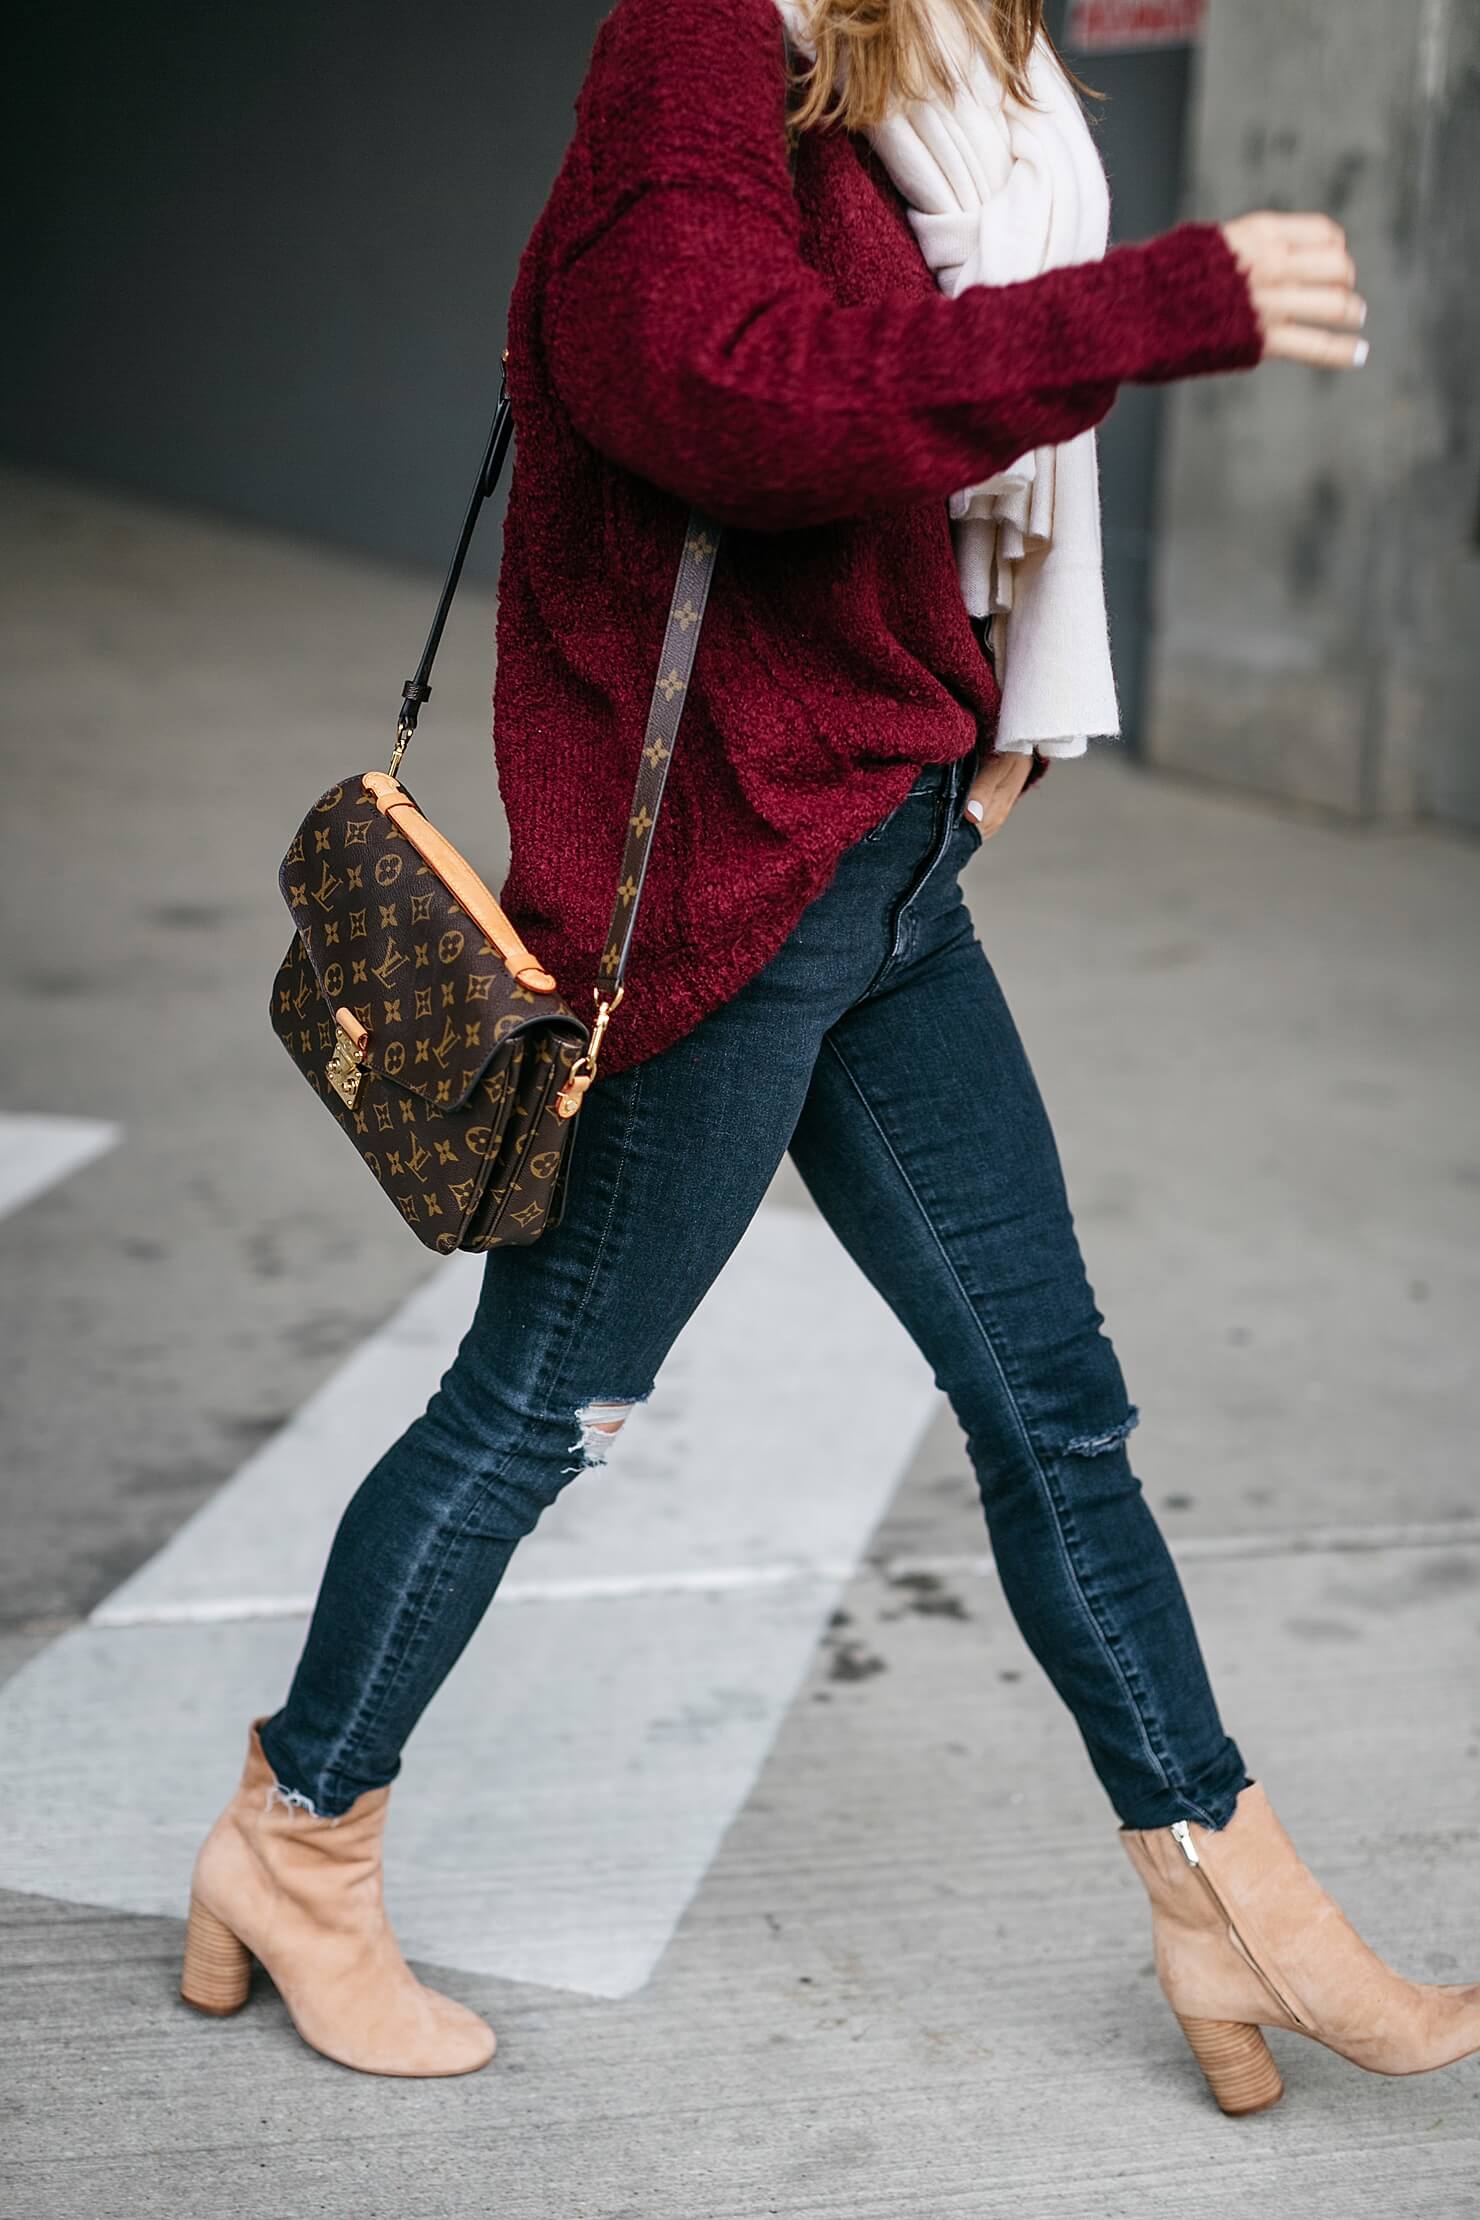 burgundy sweater, skinny jeans, white scarf and brown booties 